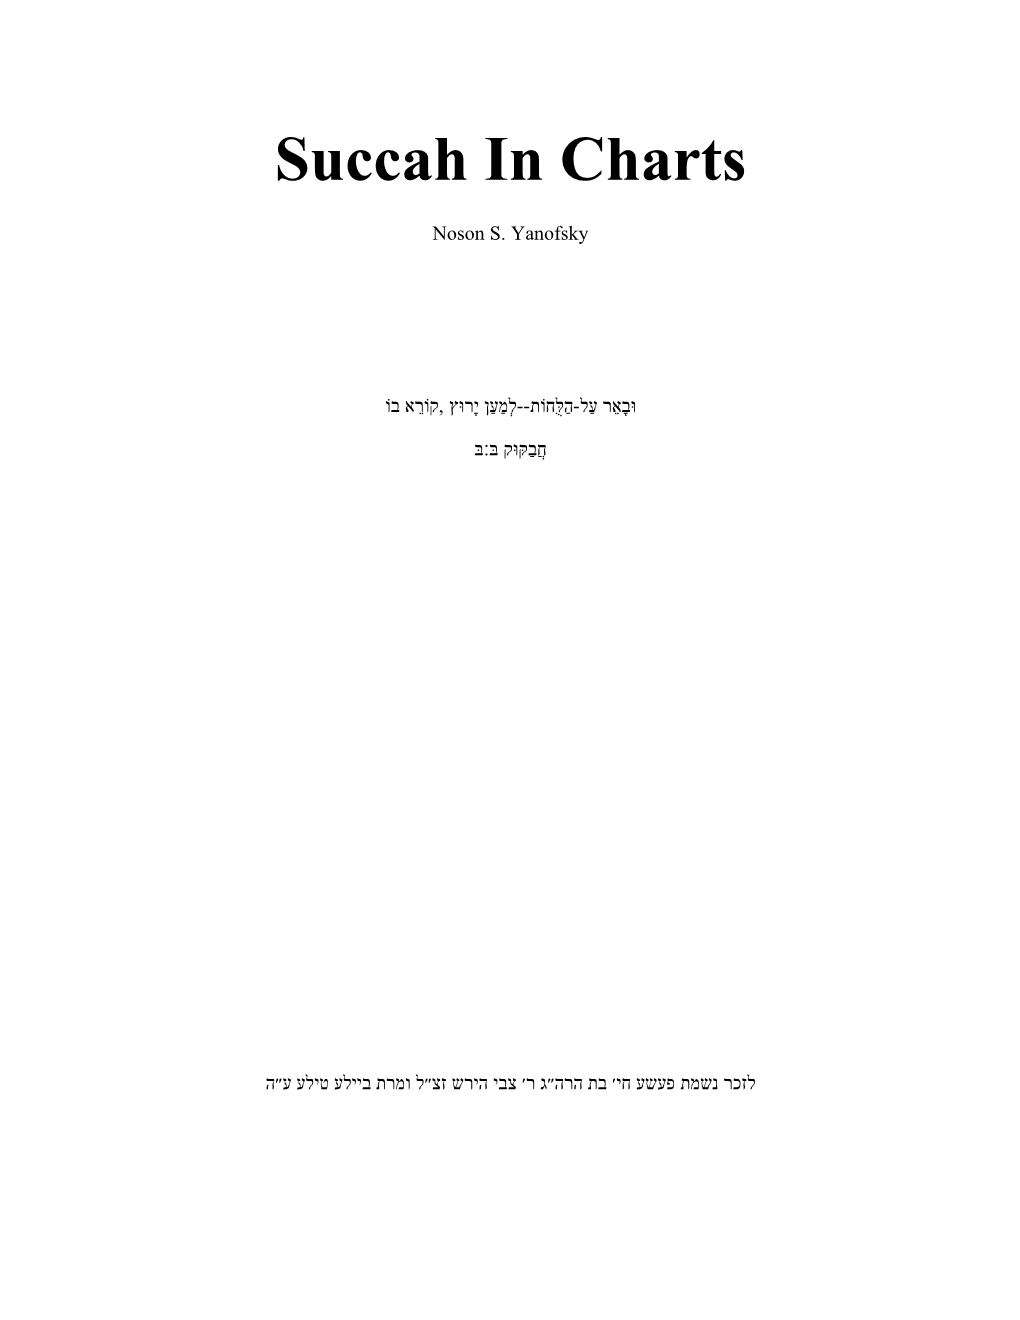 Succah in Charts